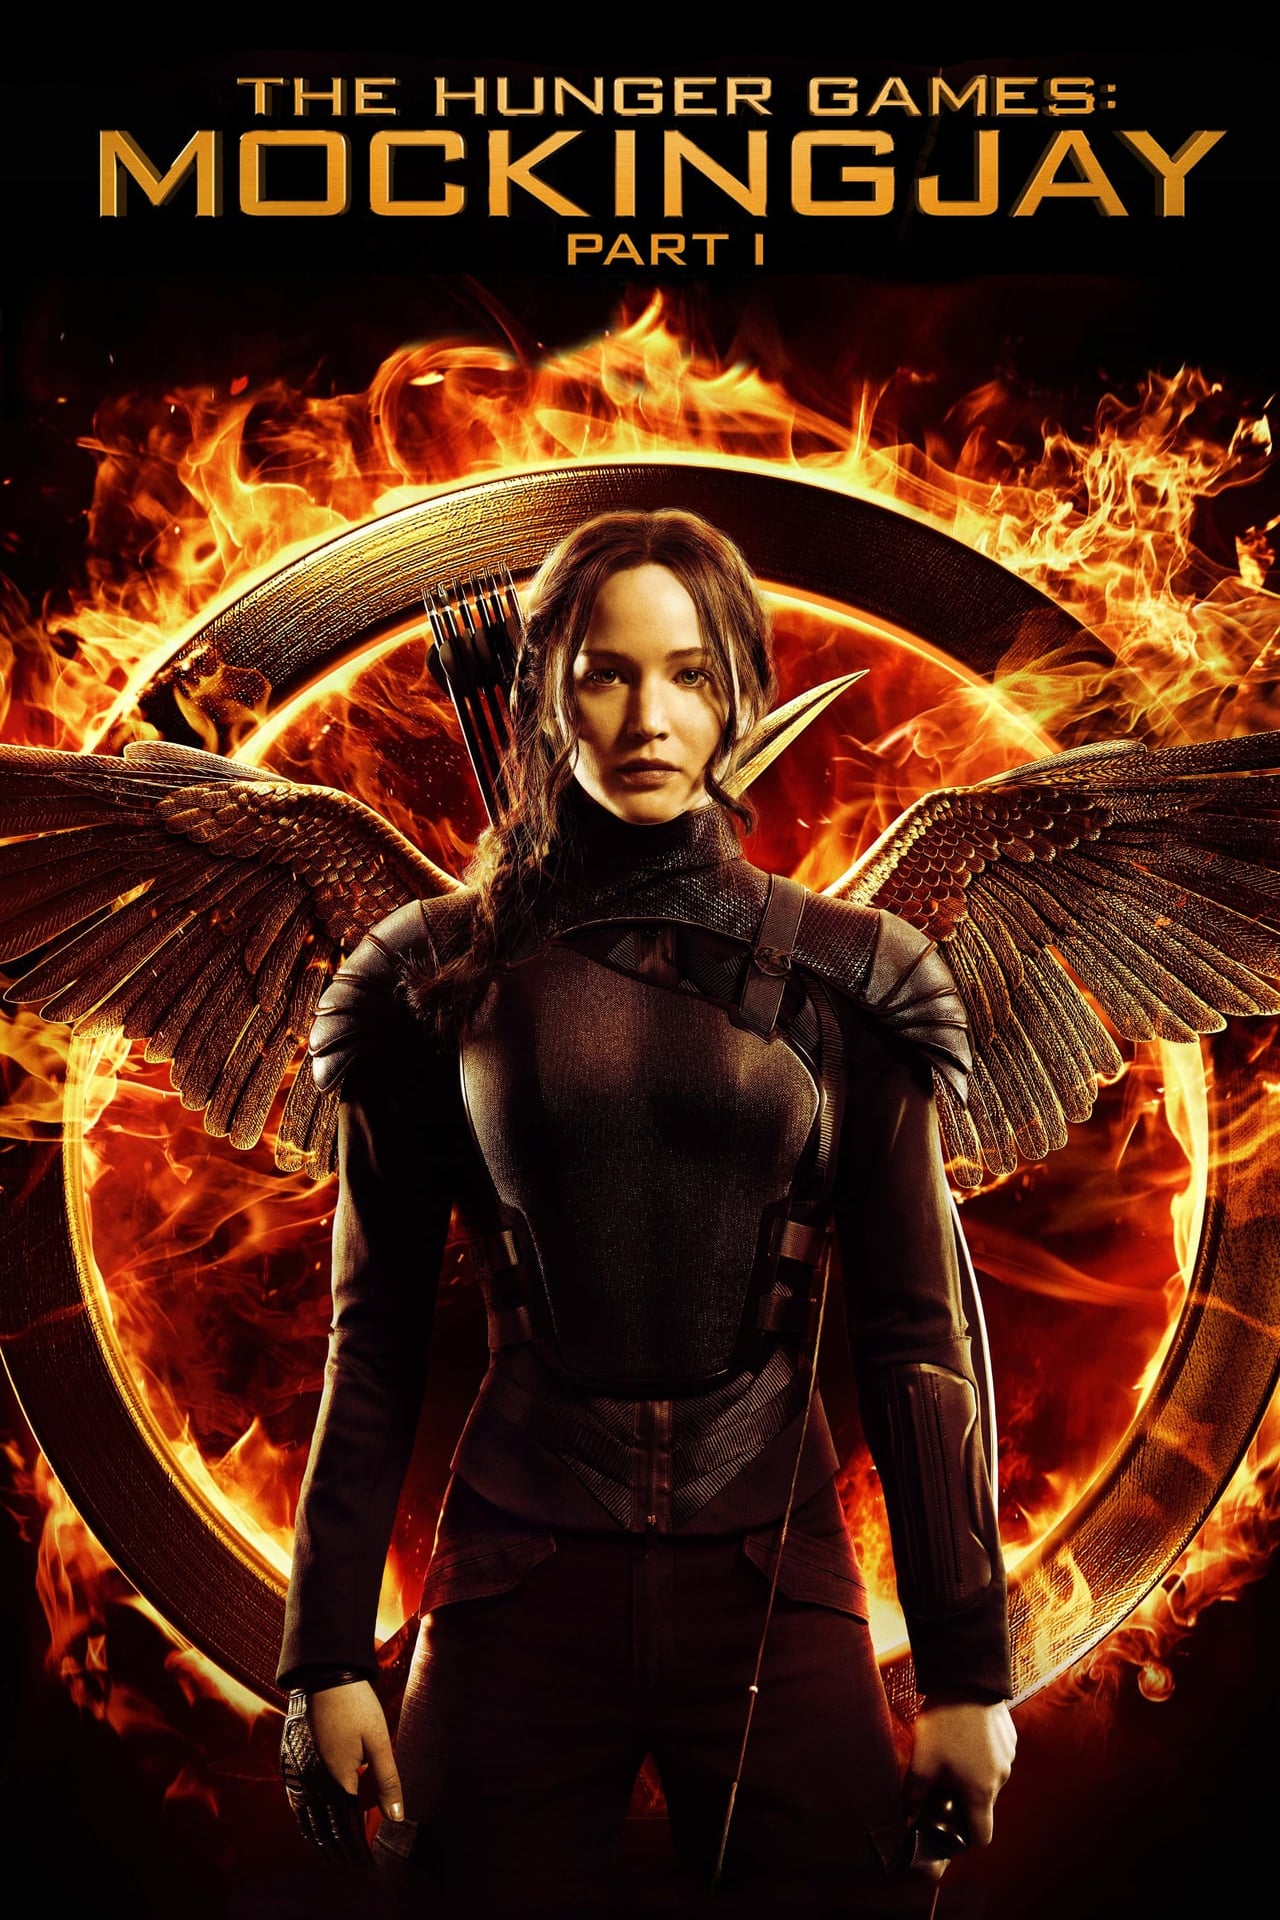 THE HUNGER GAMES: MOCKINGJAY - PART 1